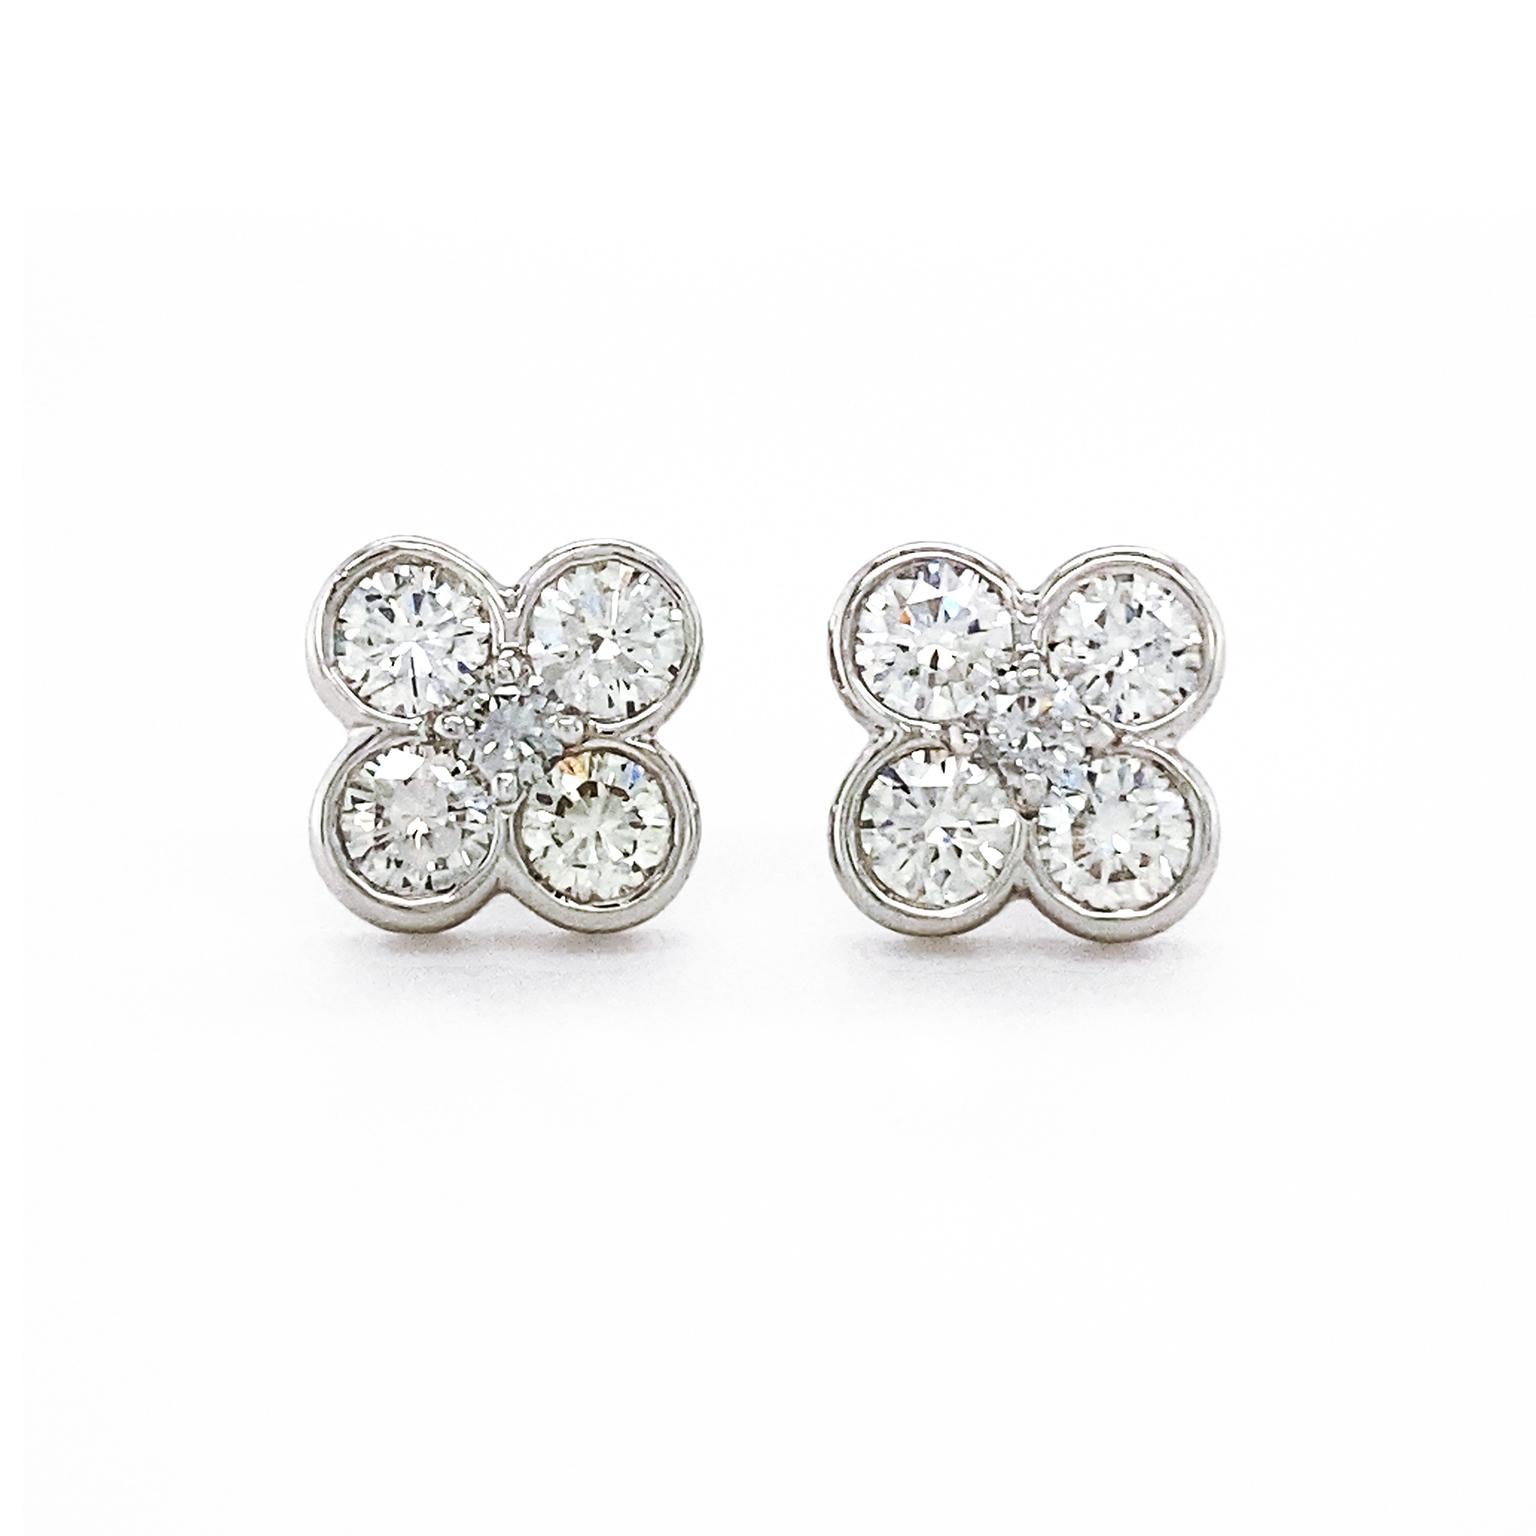 The silhouette of a four leaf clover is evoked from clusters of diamonds. Five round brilliant cut diamonds are nested together, four to represent each leaf and one in the center. These bright gemstones are EF color grades with VS clarity and have a